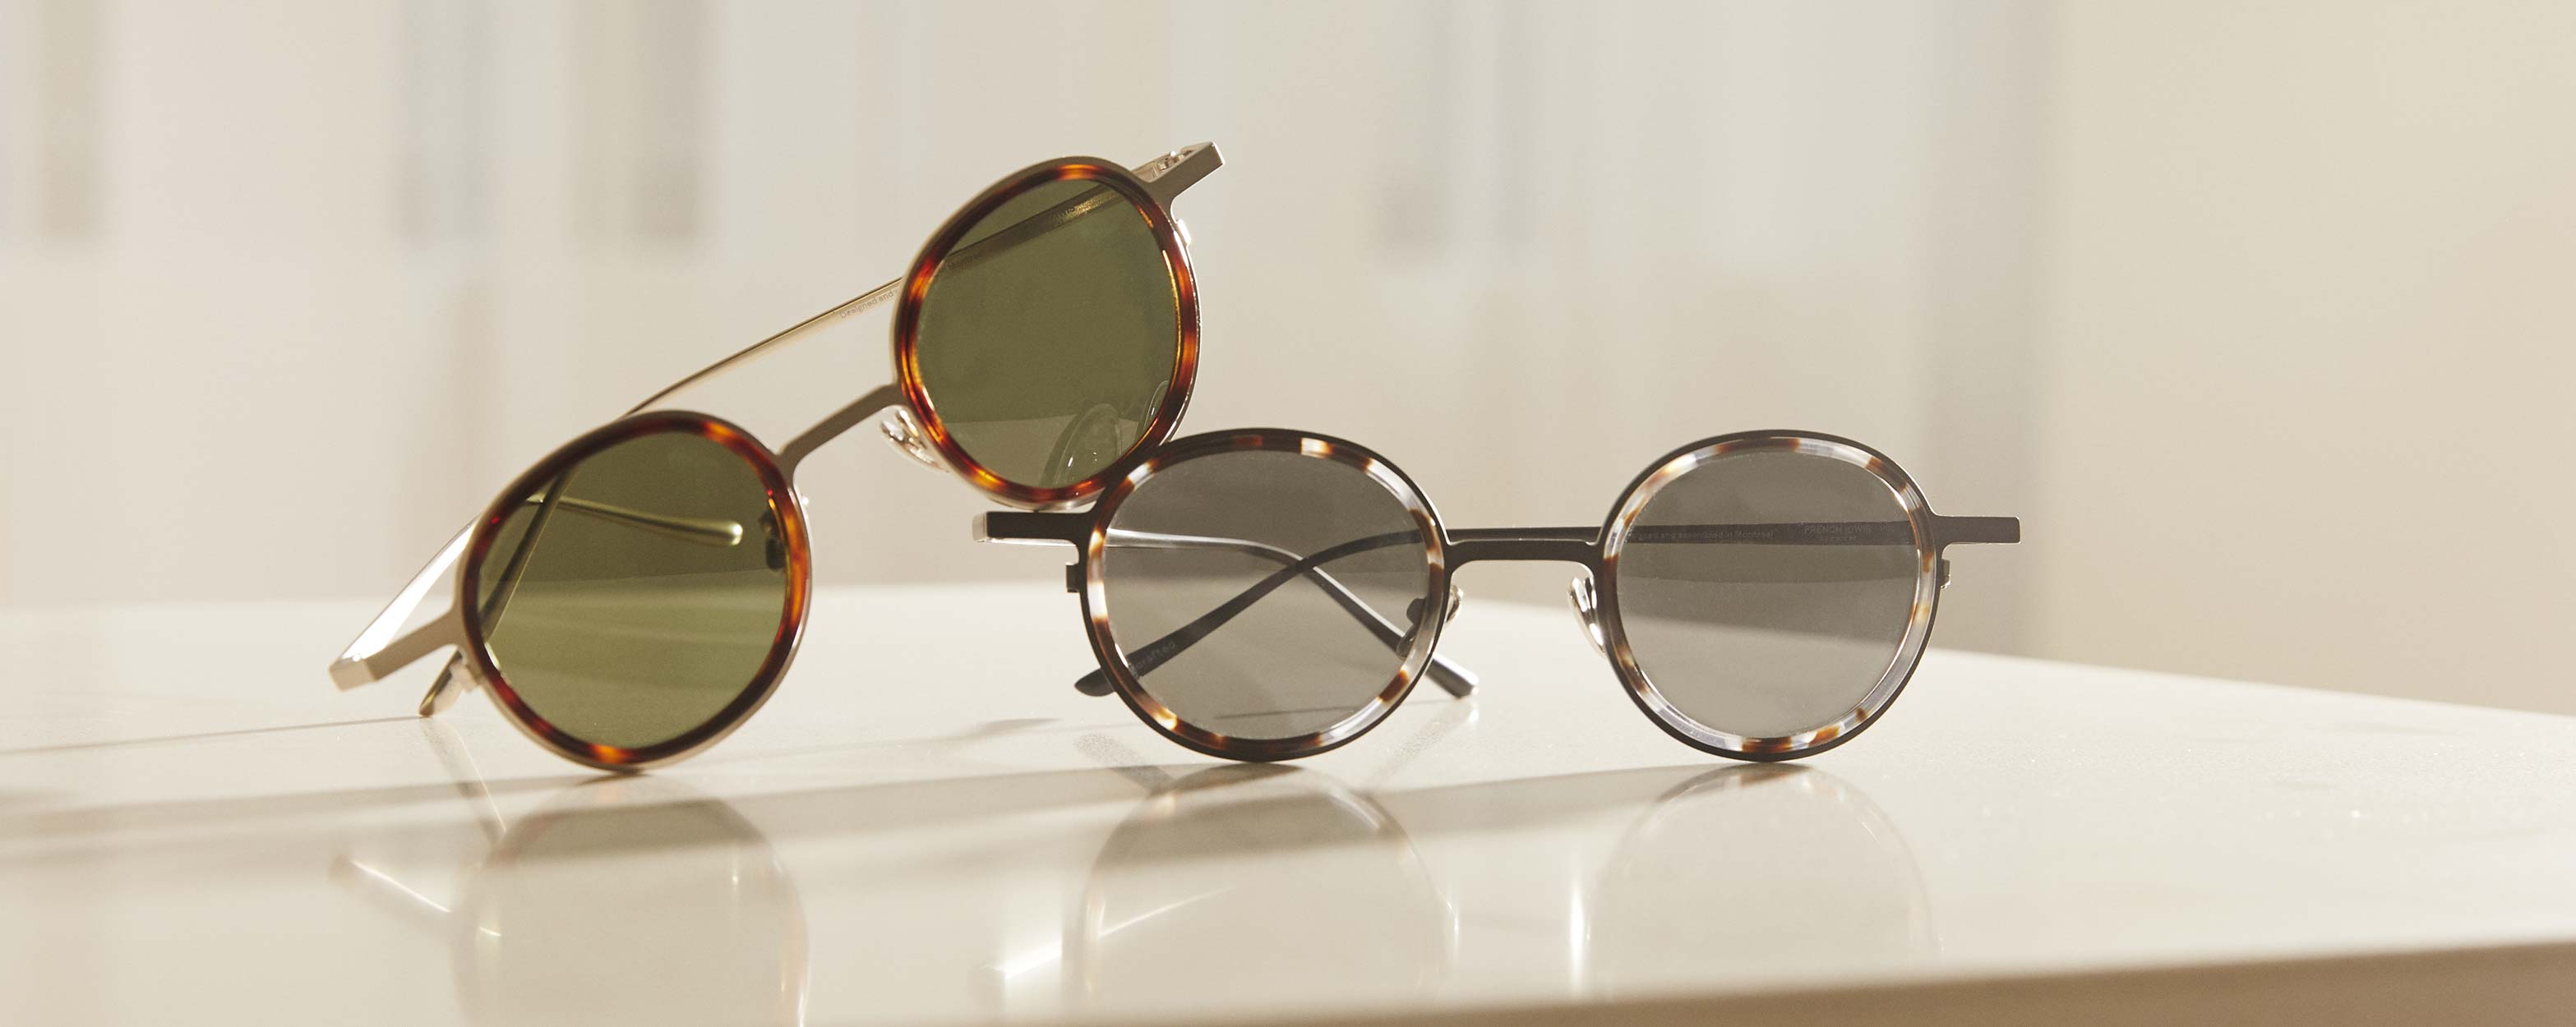 Photo Details of Arthur Sun Brown Marble & Mat Gold Sun Glasses in a room